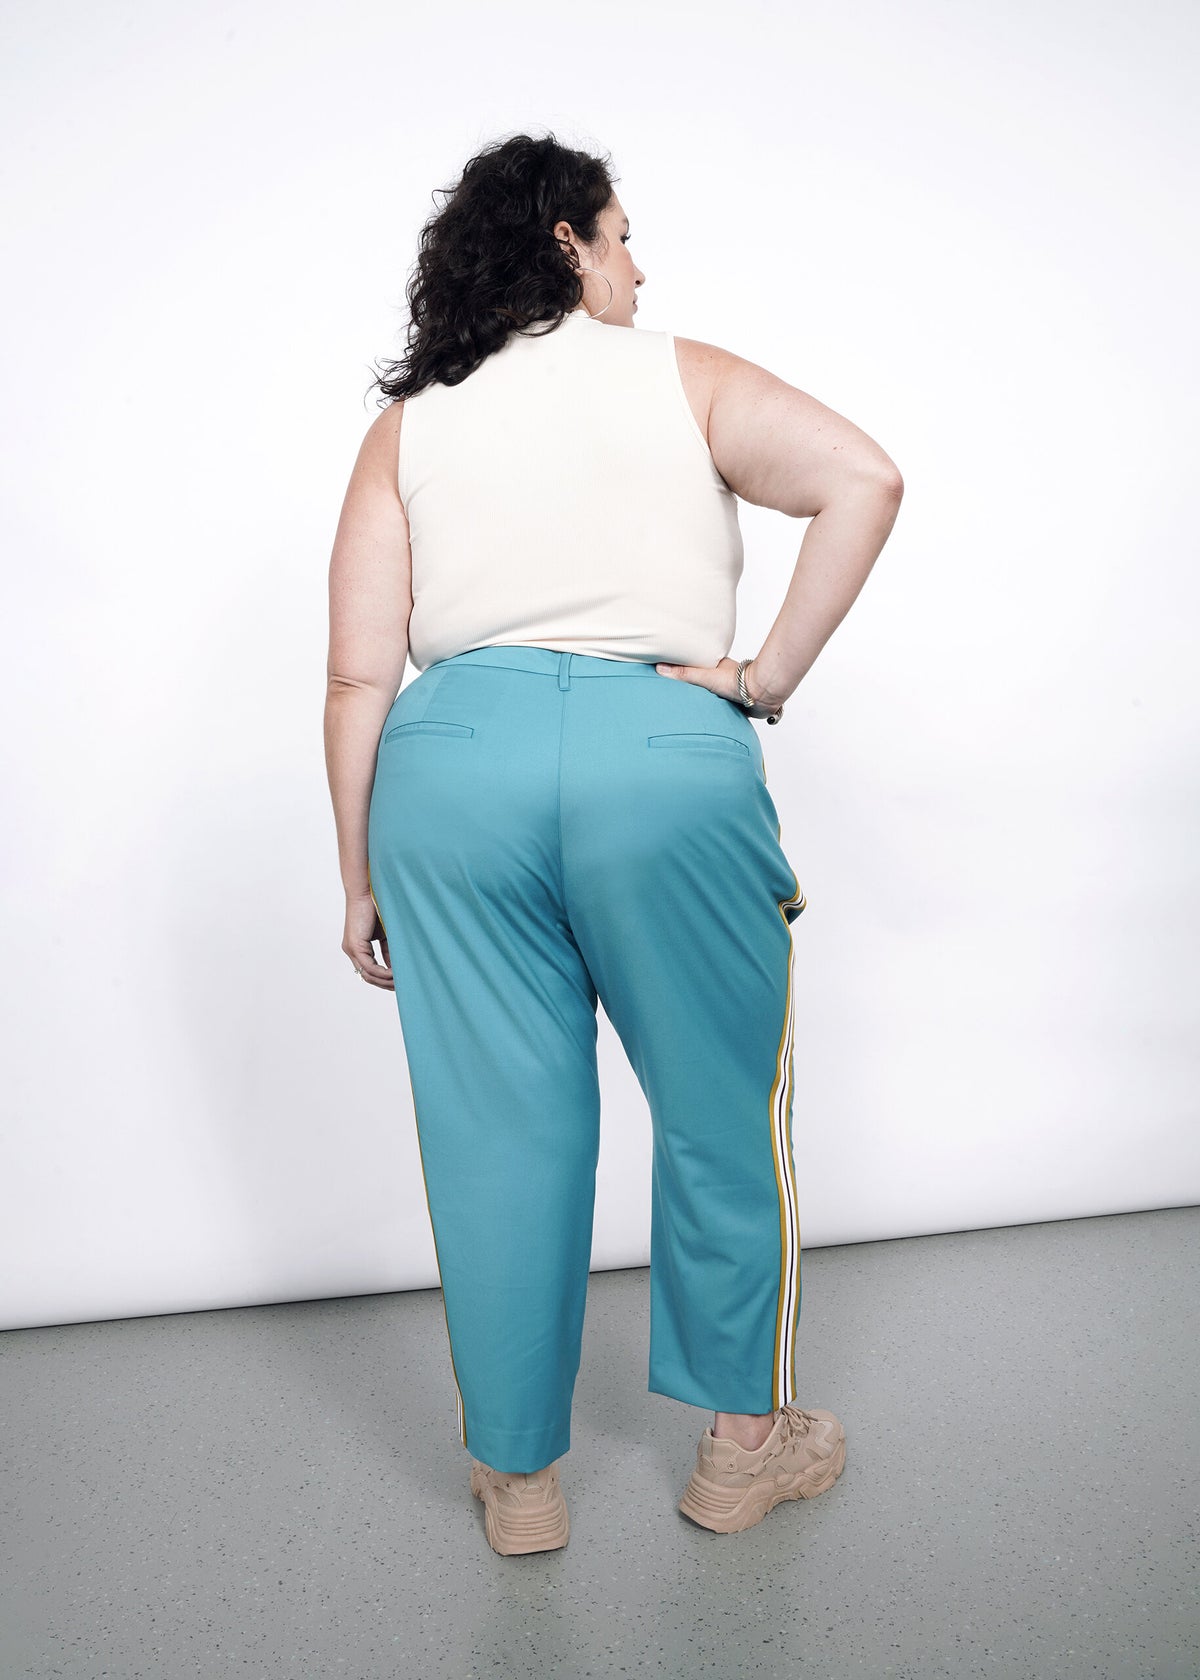 The Empower Taped Colorblock Slim Crop Pant in Coastal